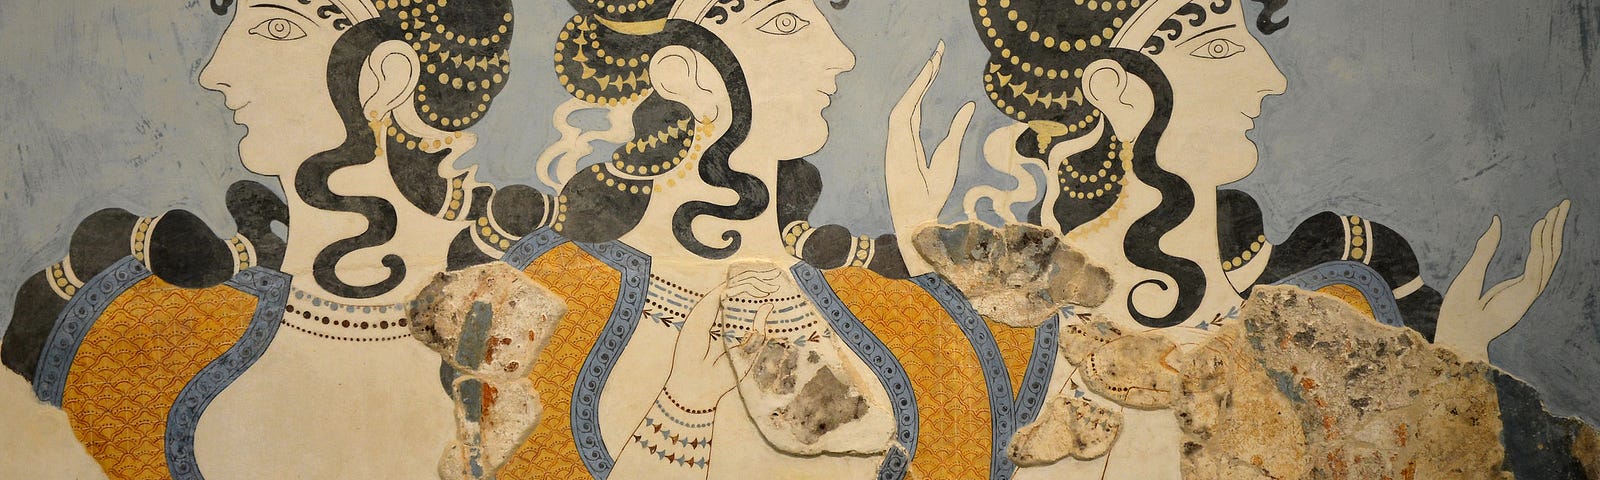 The ‘Ladies in Blue’ fresco is a recreated fresco from the Palace of Knossos on the island of Crete